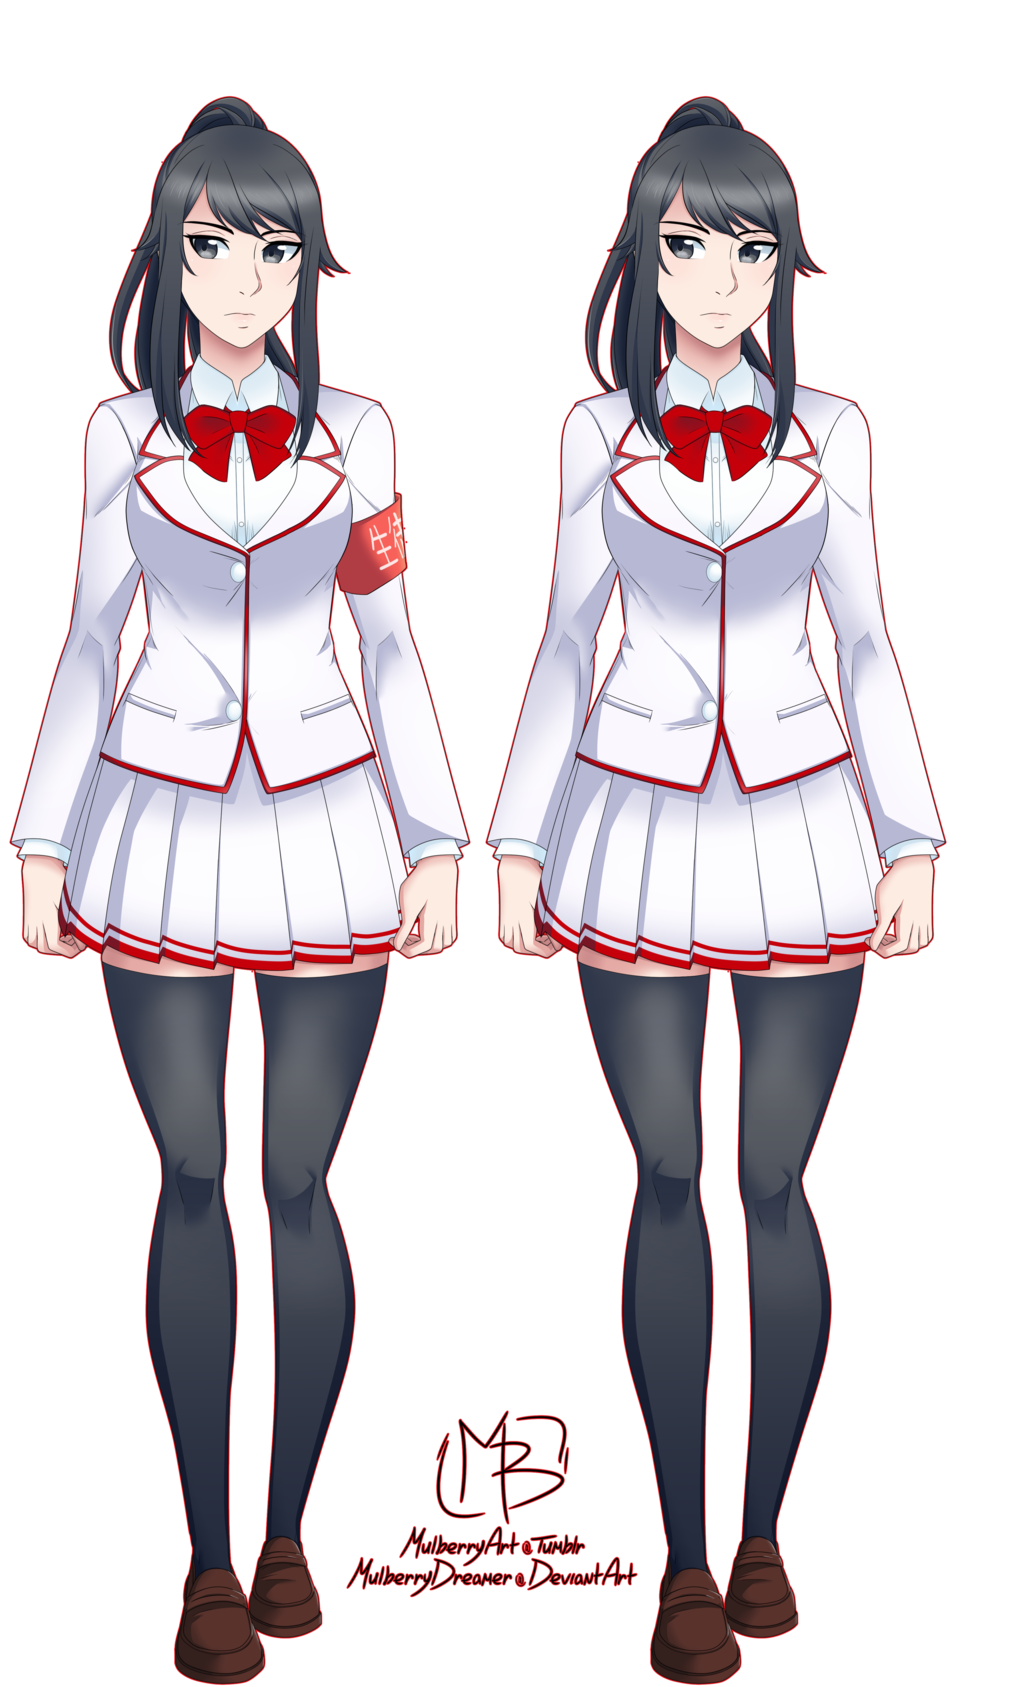 Yandere Chan As A Student Council Member Minecraft Skin